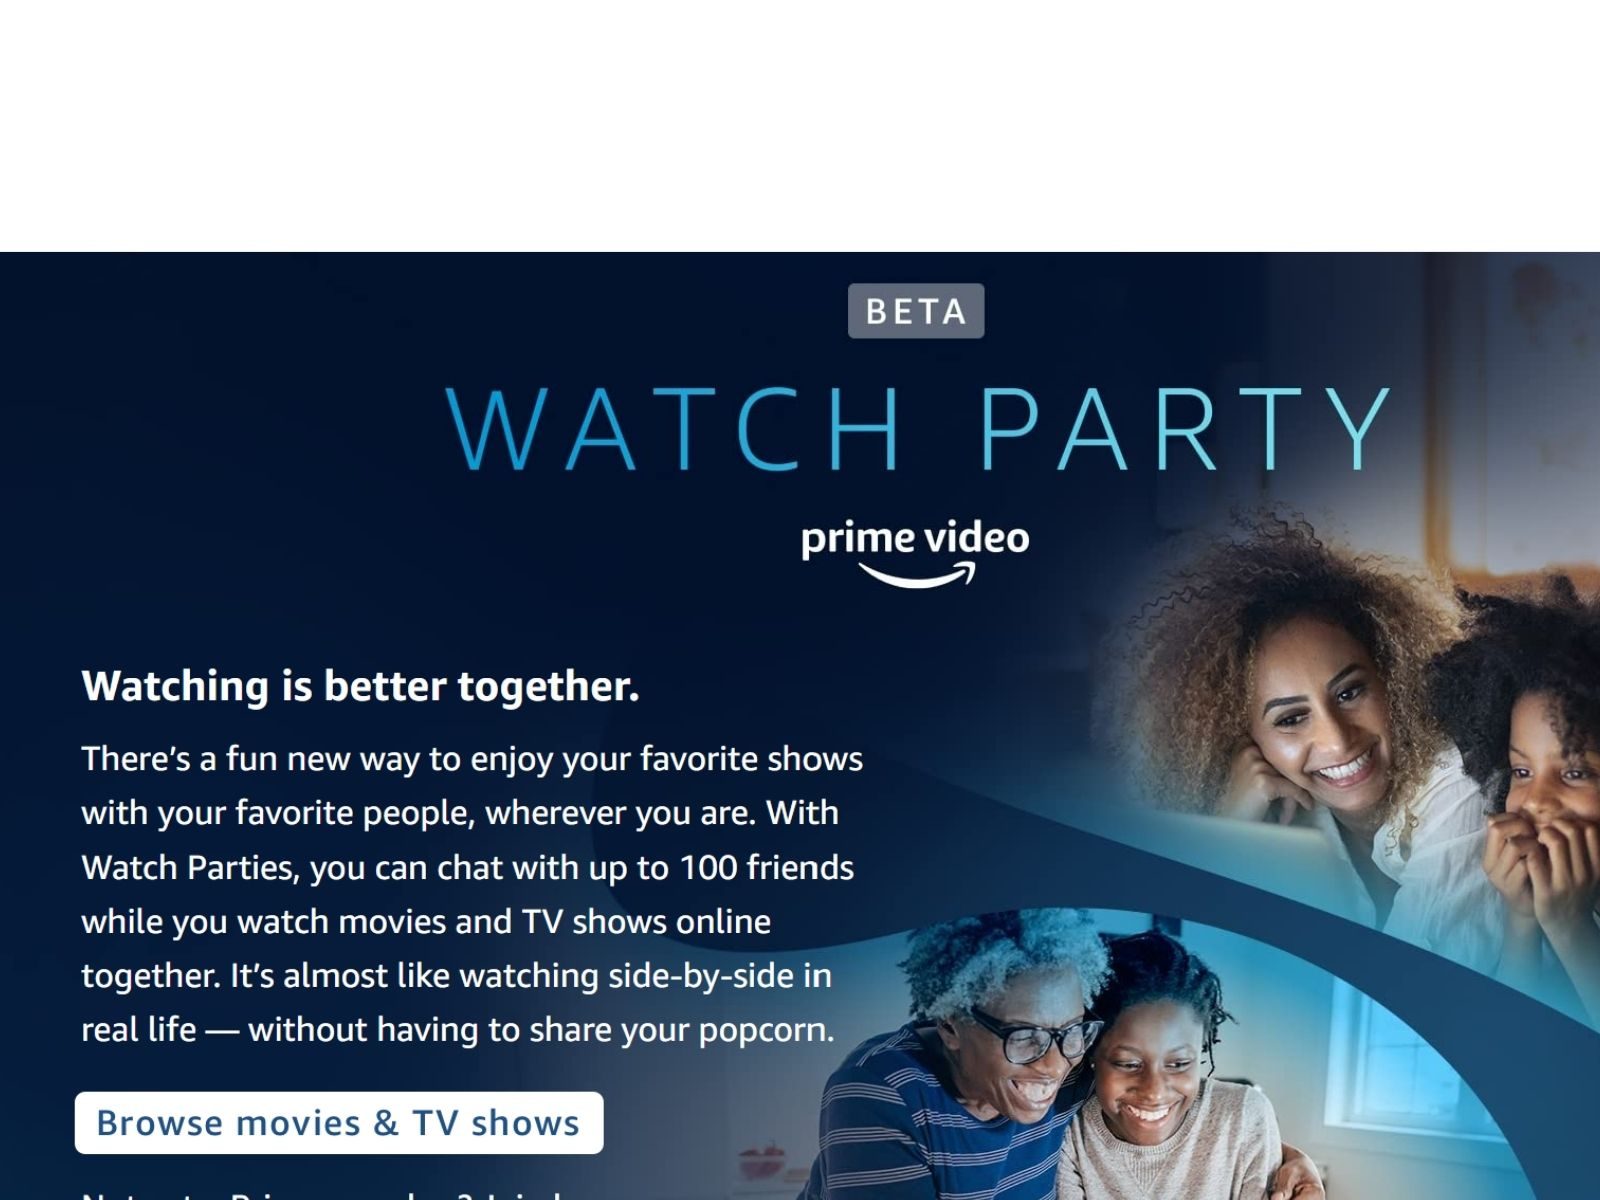 Watch Party: Here's how to watch movies, shows with